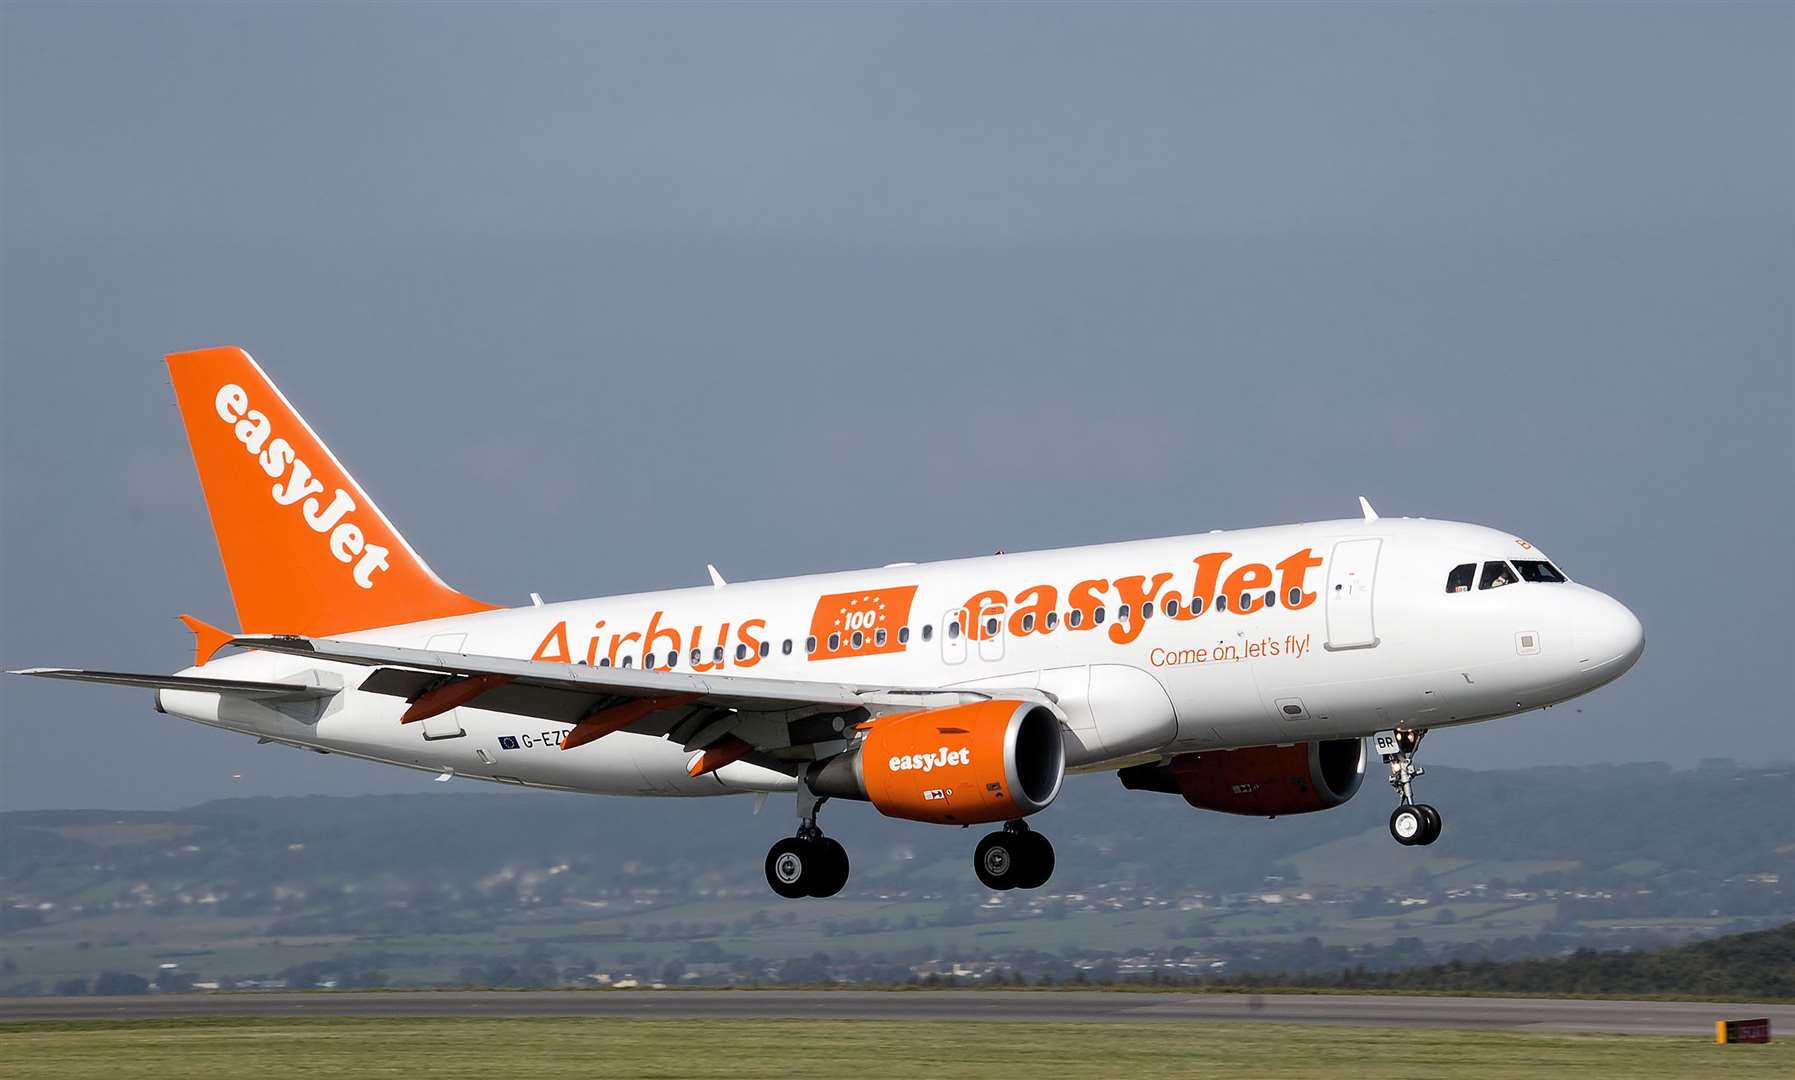 Easyjet is subject to a class action claim over leaked customer data